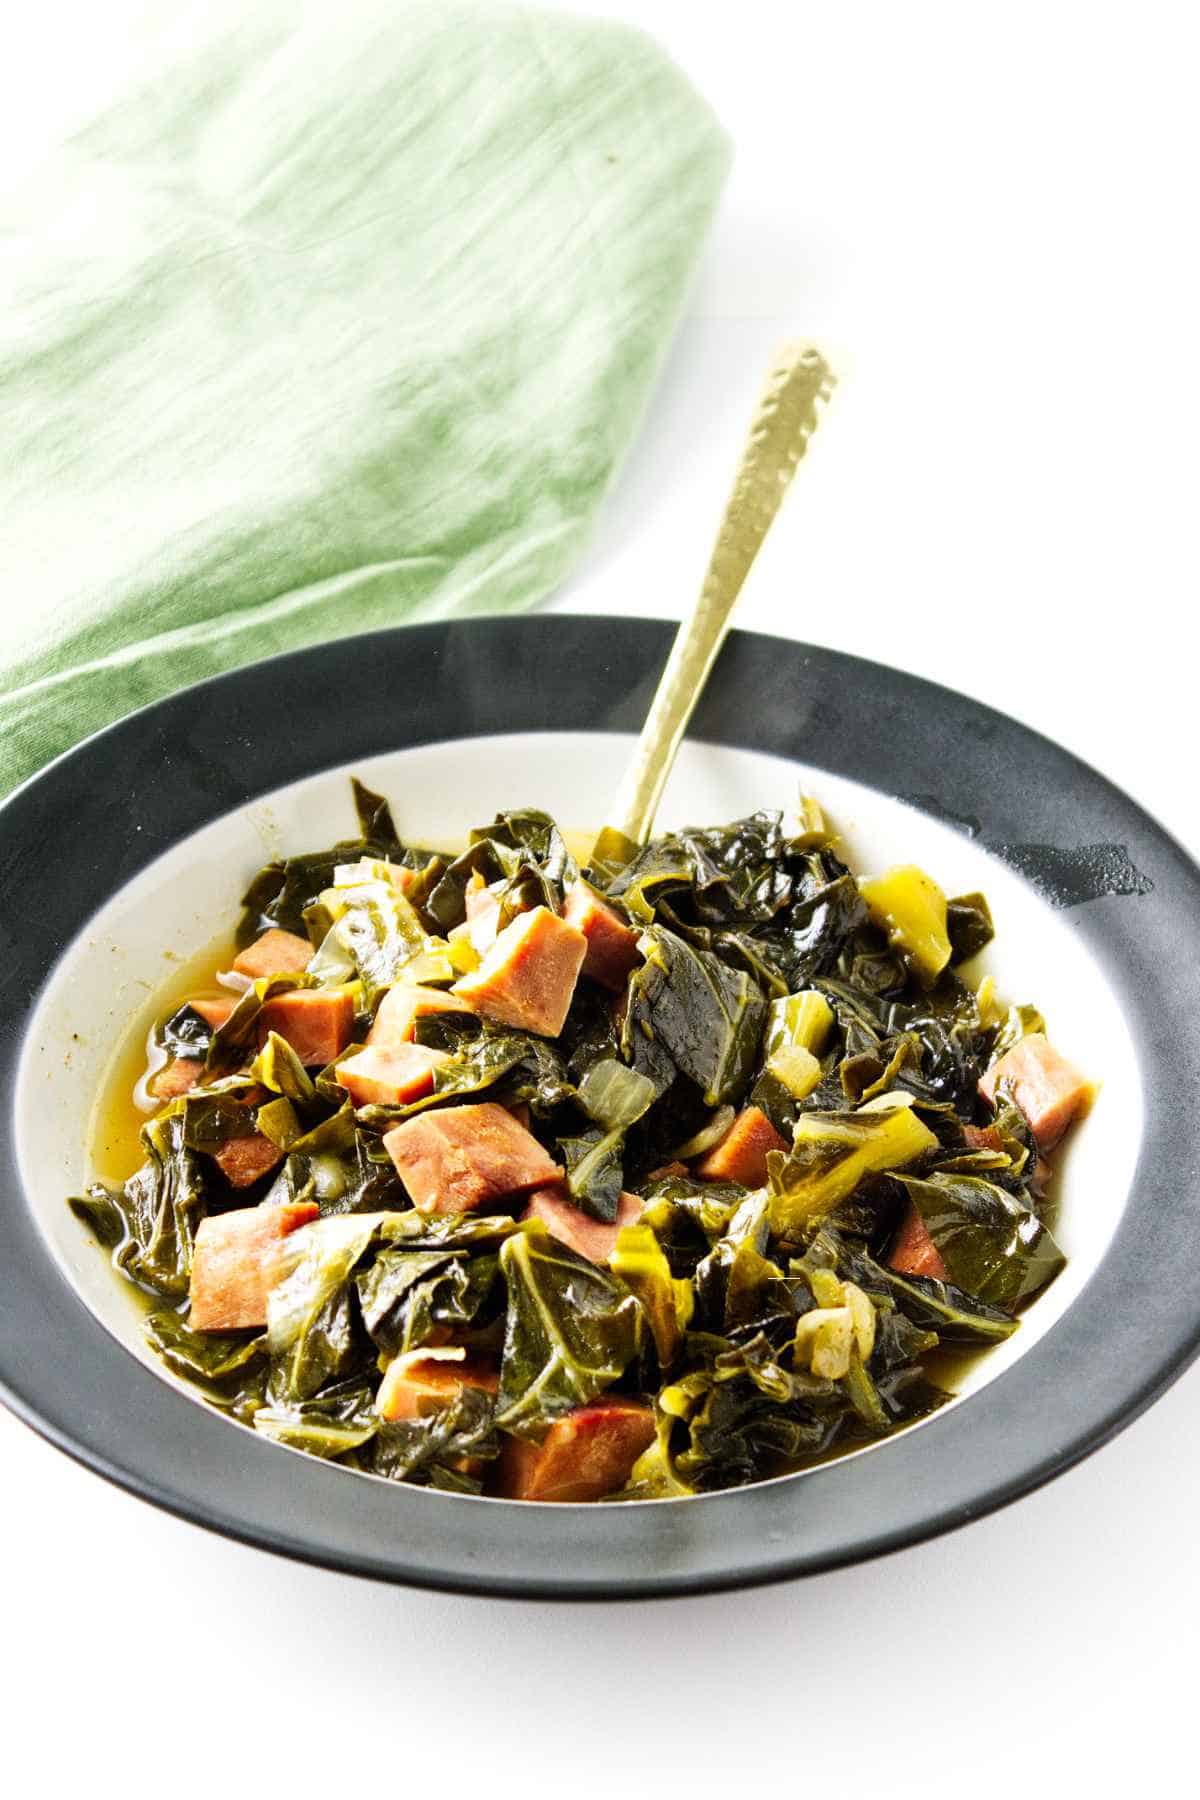 slow cooked ham and collards in a bowl.